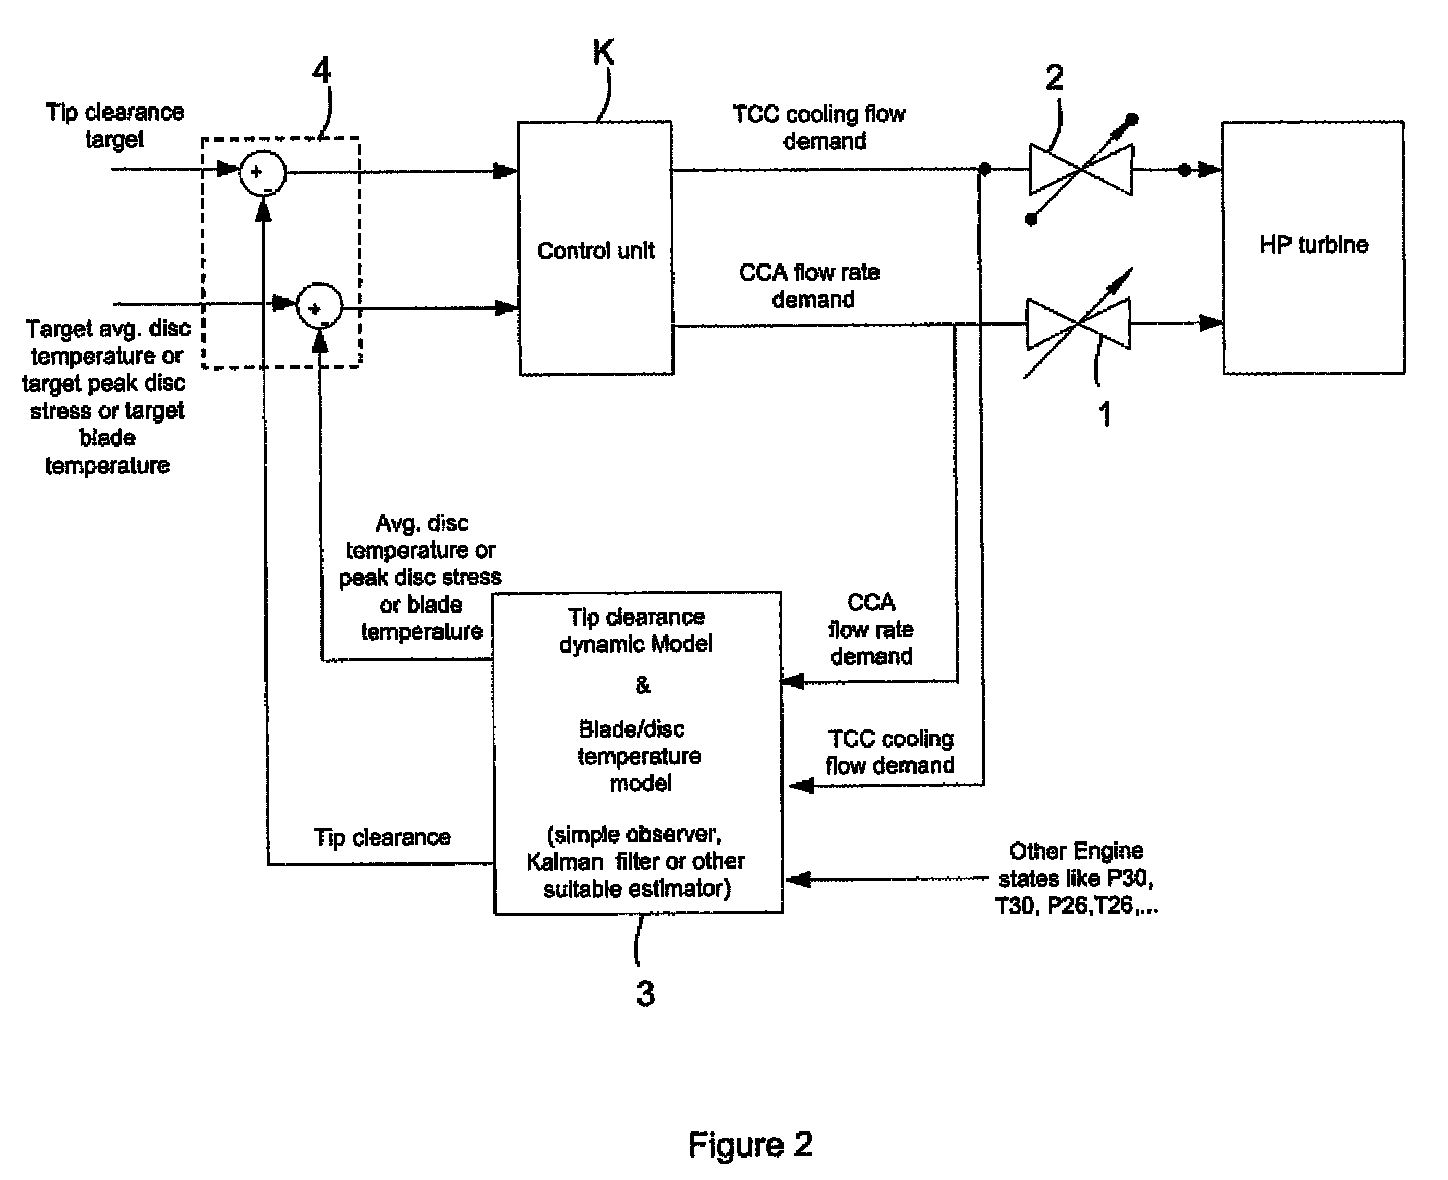 Gas turbine engine having a multi-variable closed loop controller for regulating tip clearance